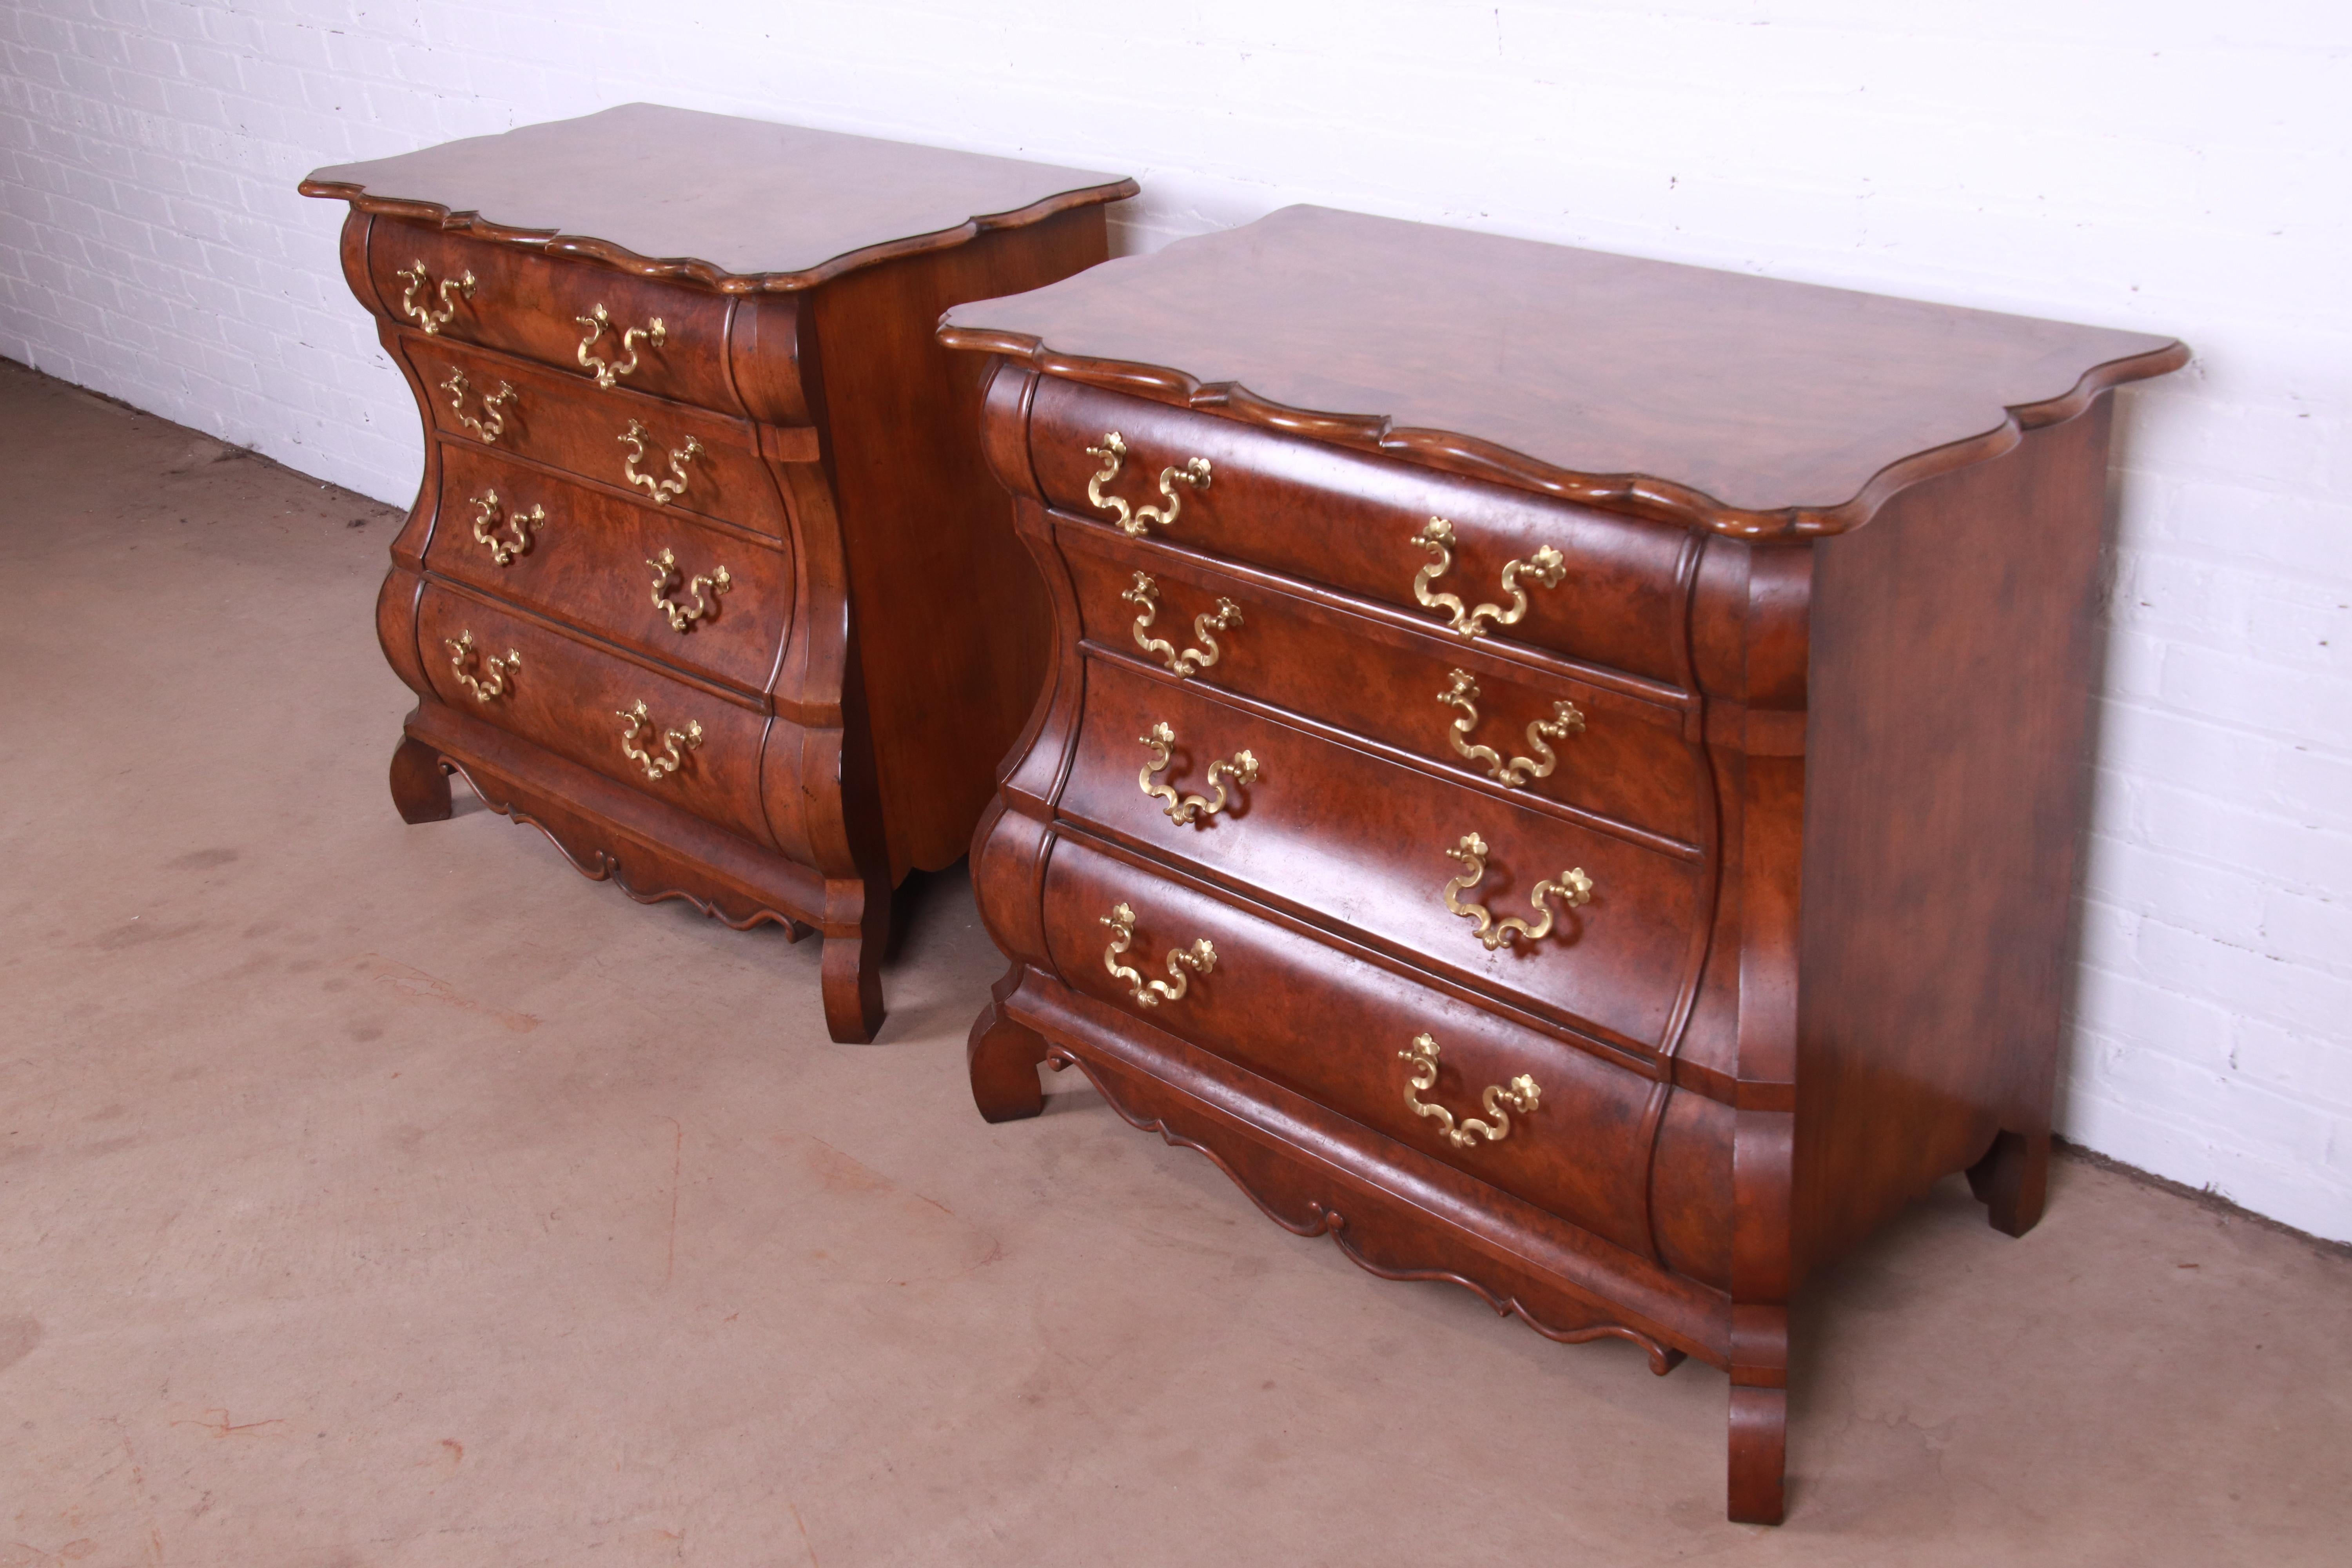 American Baker Furniture Dutch Burled Walnut Bombe Chests or Commodes, Pair